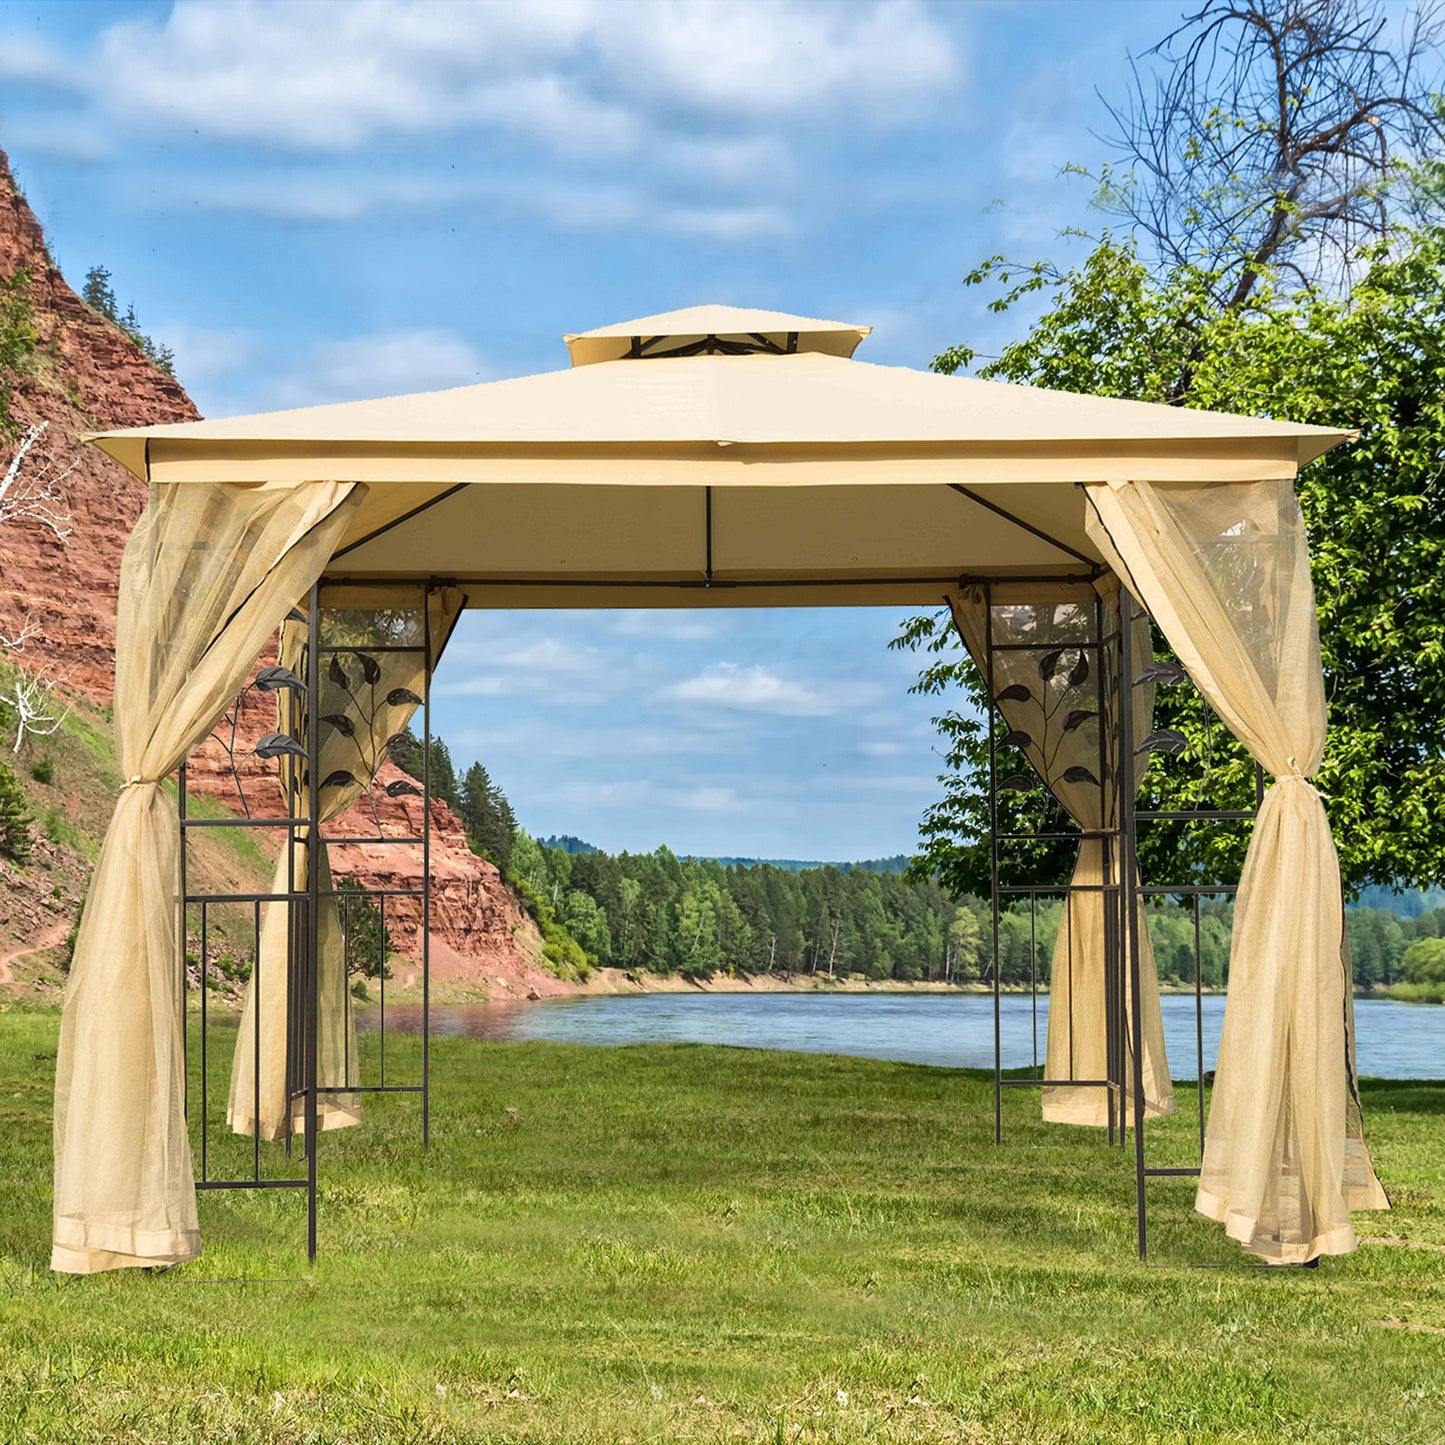 Outsunny Gazebo 3 x 3 Double Top-Beige Marquee Metal Party Tent Canopy Pavillion Patio Garden Shelter with mesh sidewall Pavilion